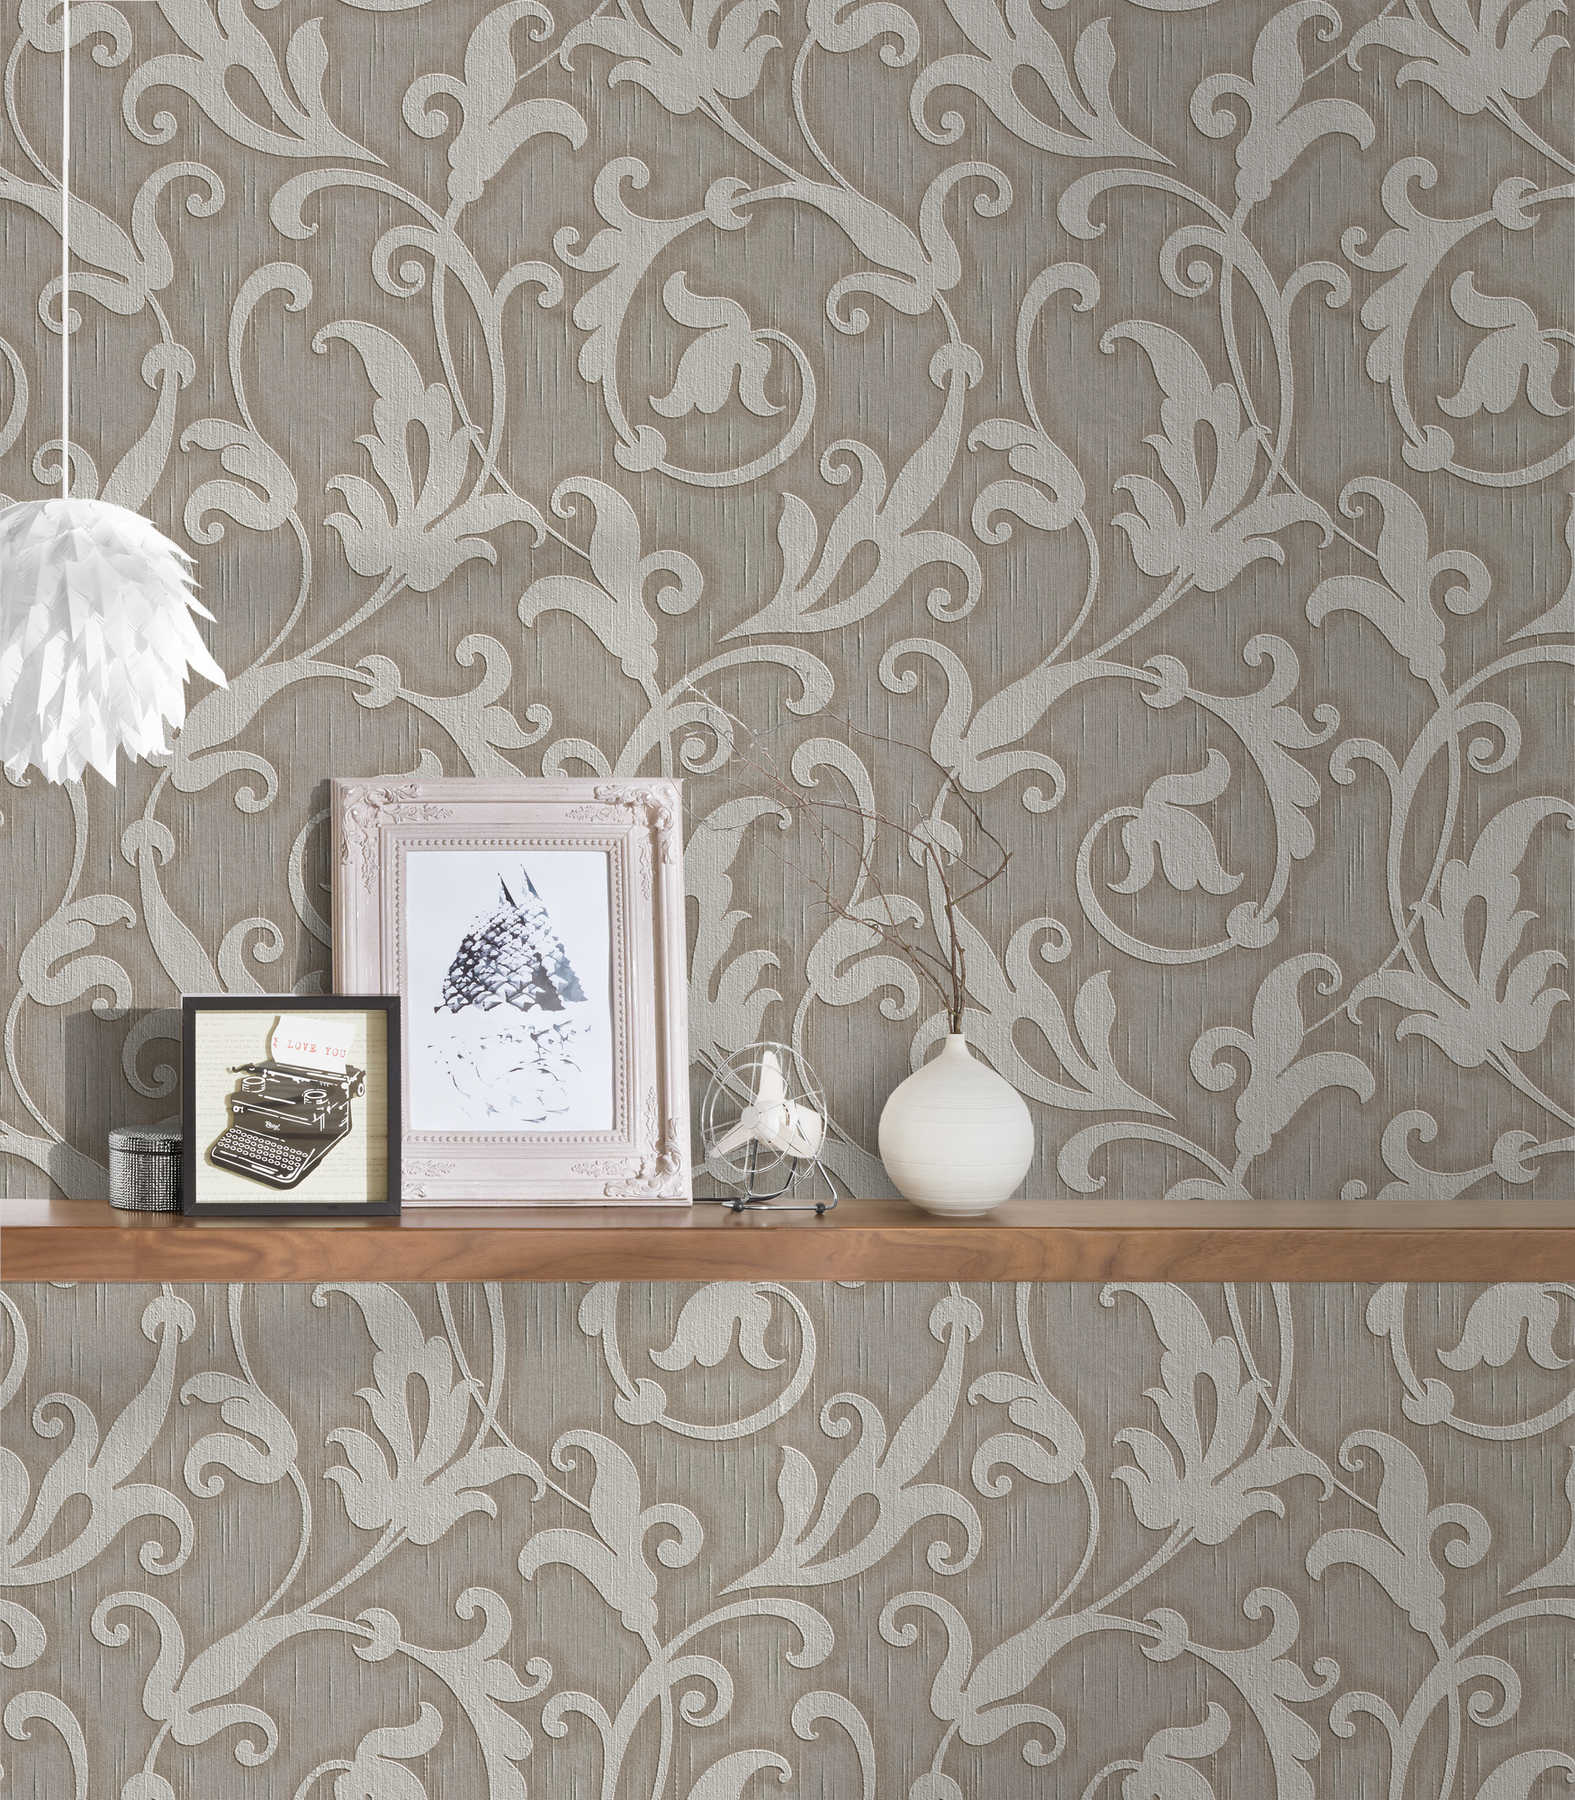             Premium ornament wallpaper with textile structure & embossed pattern - grey, brown
        